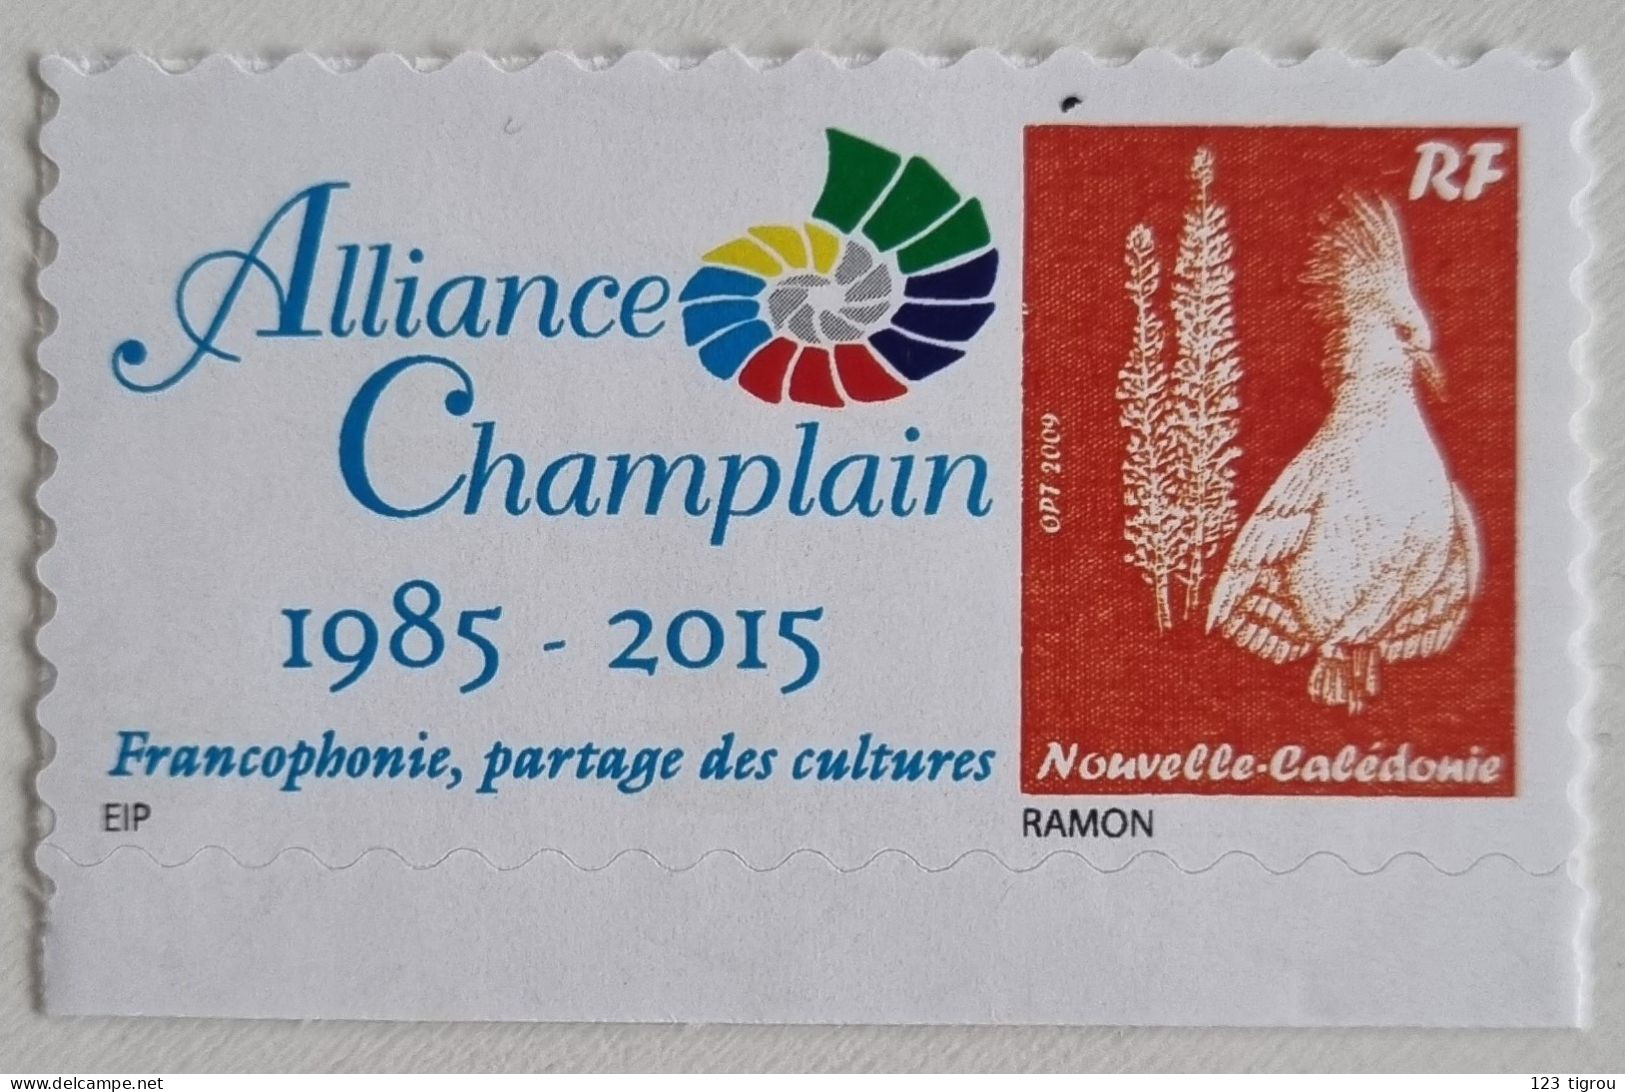 CAGOU PERSONNALISE ALLIANCE CHAMPLAIN TB - Unused Stamps